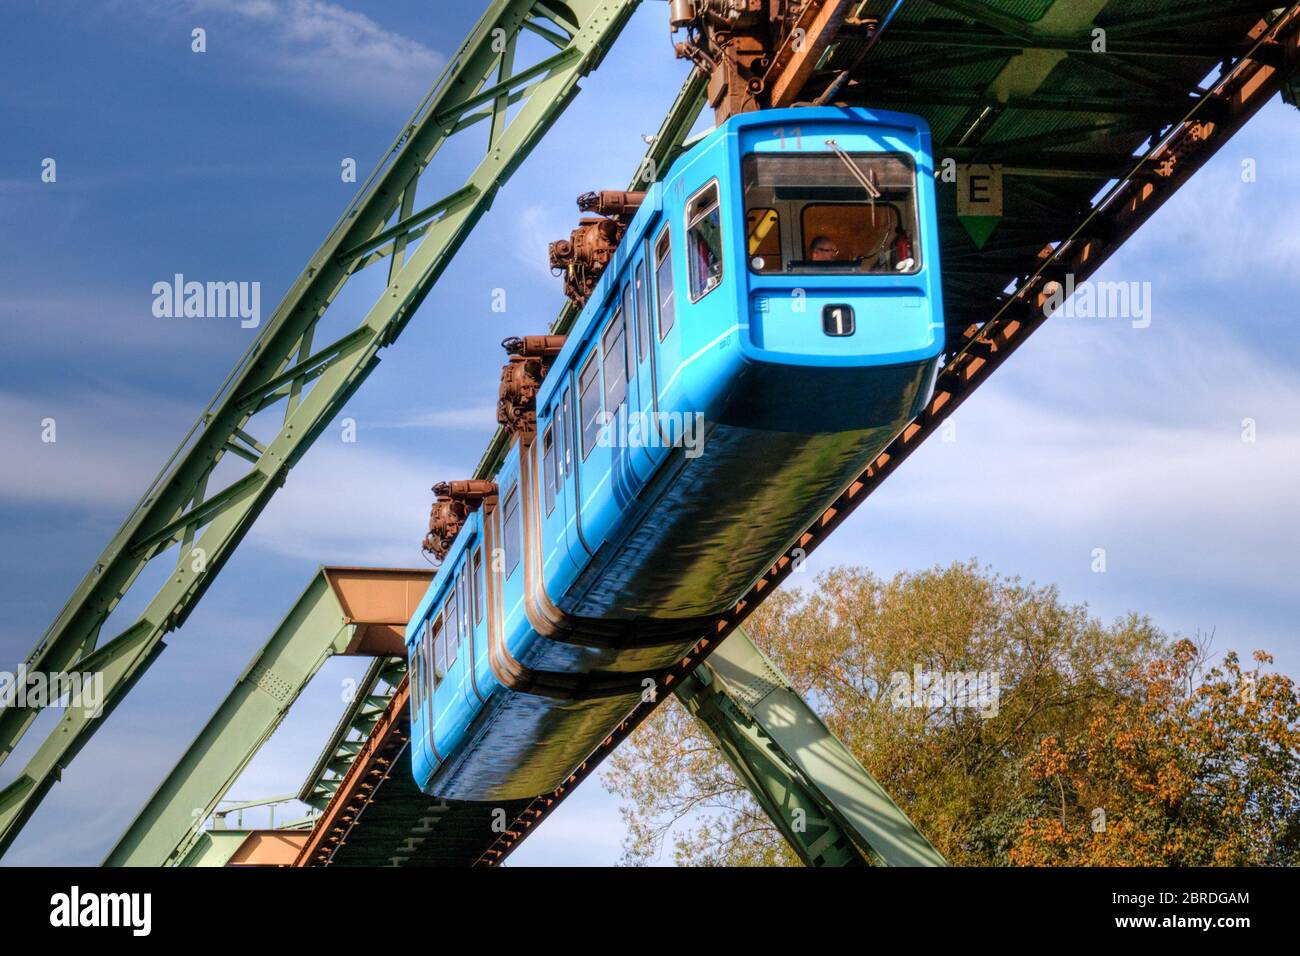 A train of the Wuppertal suspension railway Stock Photo